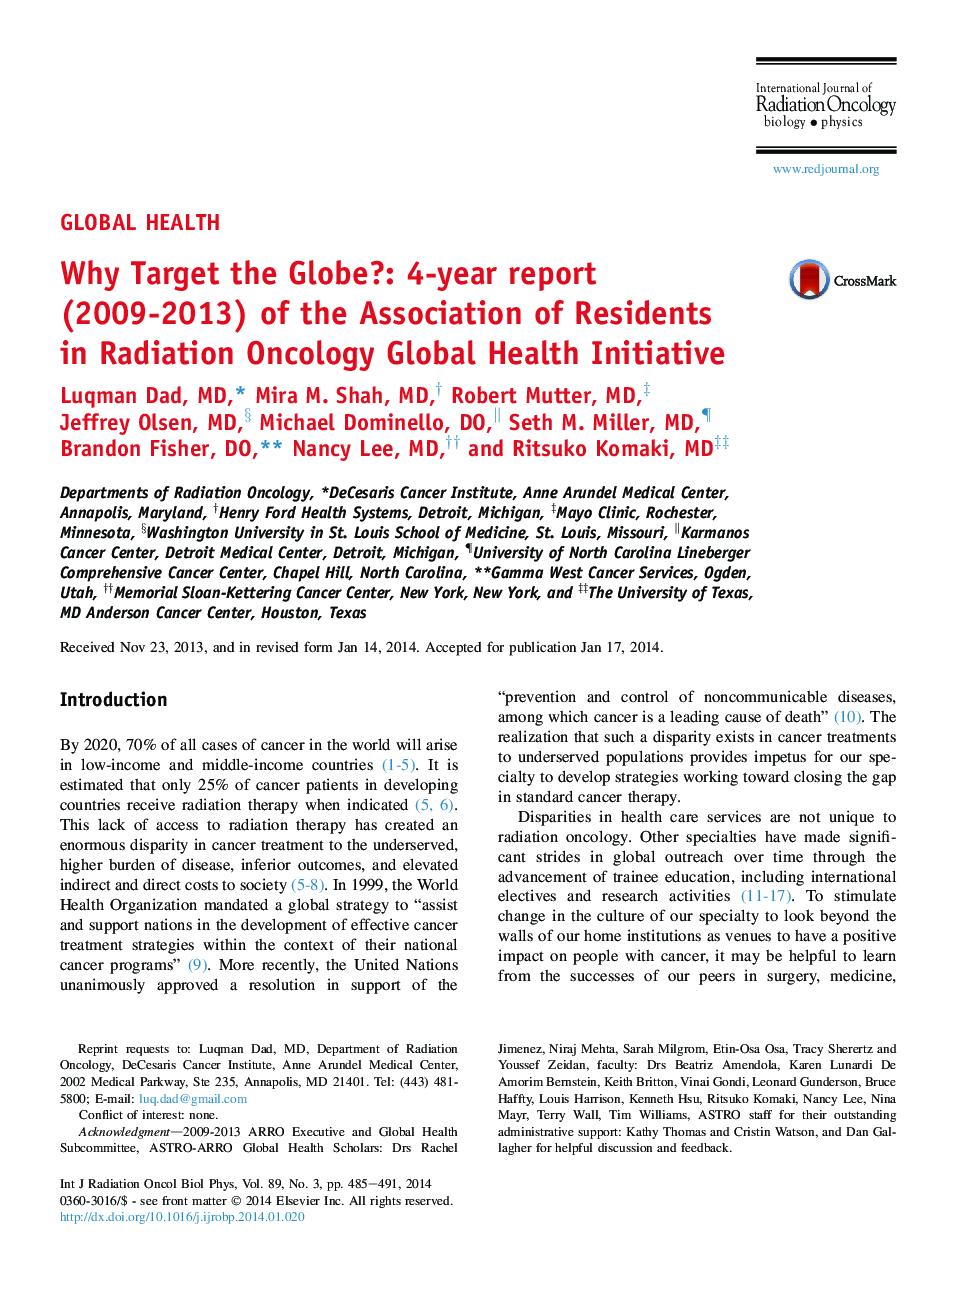 Why Target the Globe?: 4-year report (2009-2013) of the Association of Residents in Radiation Oncology Global Health Initiative